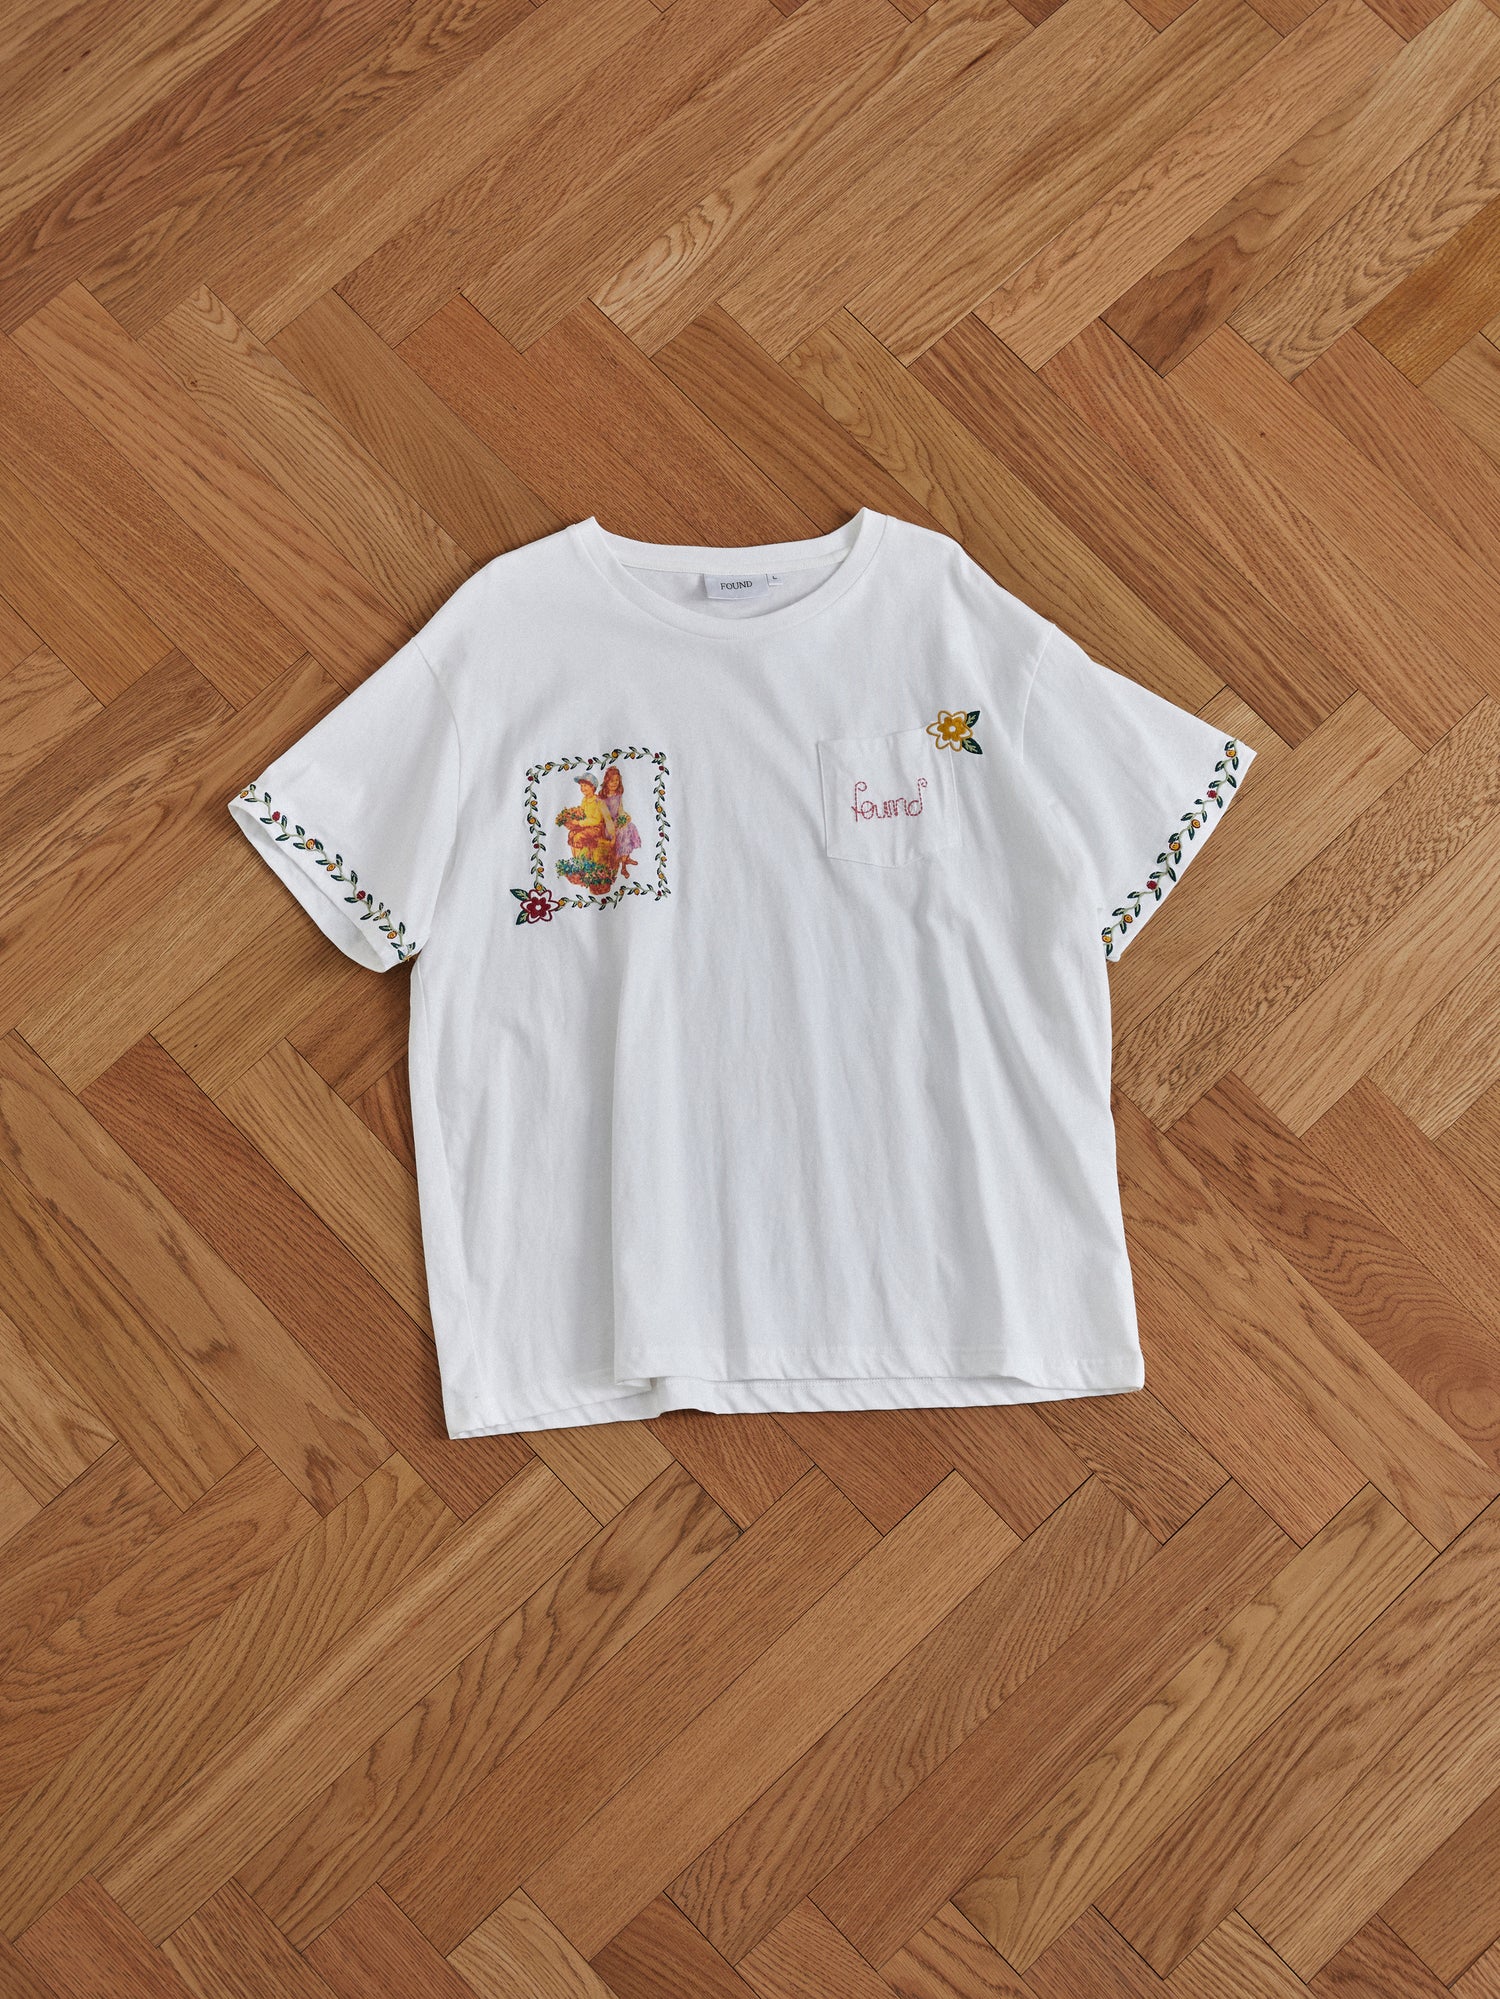 A Flower Children Tee with embroidered flowers inspired by Phulkari style embroideries, by Found.